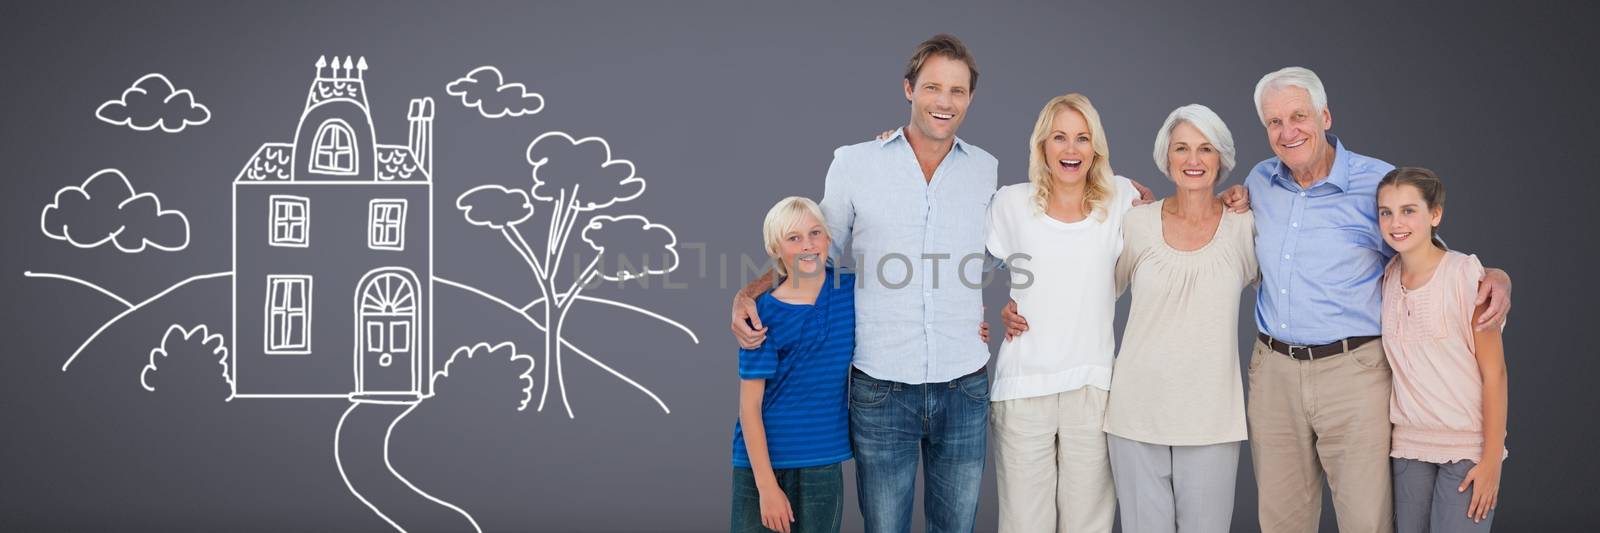 Digital composite of Family generations together with home drawing